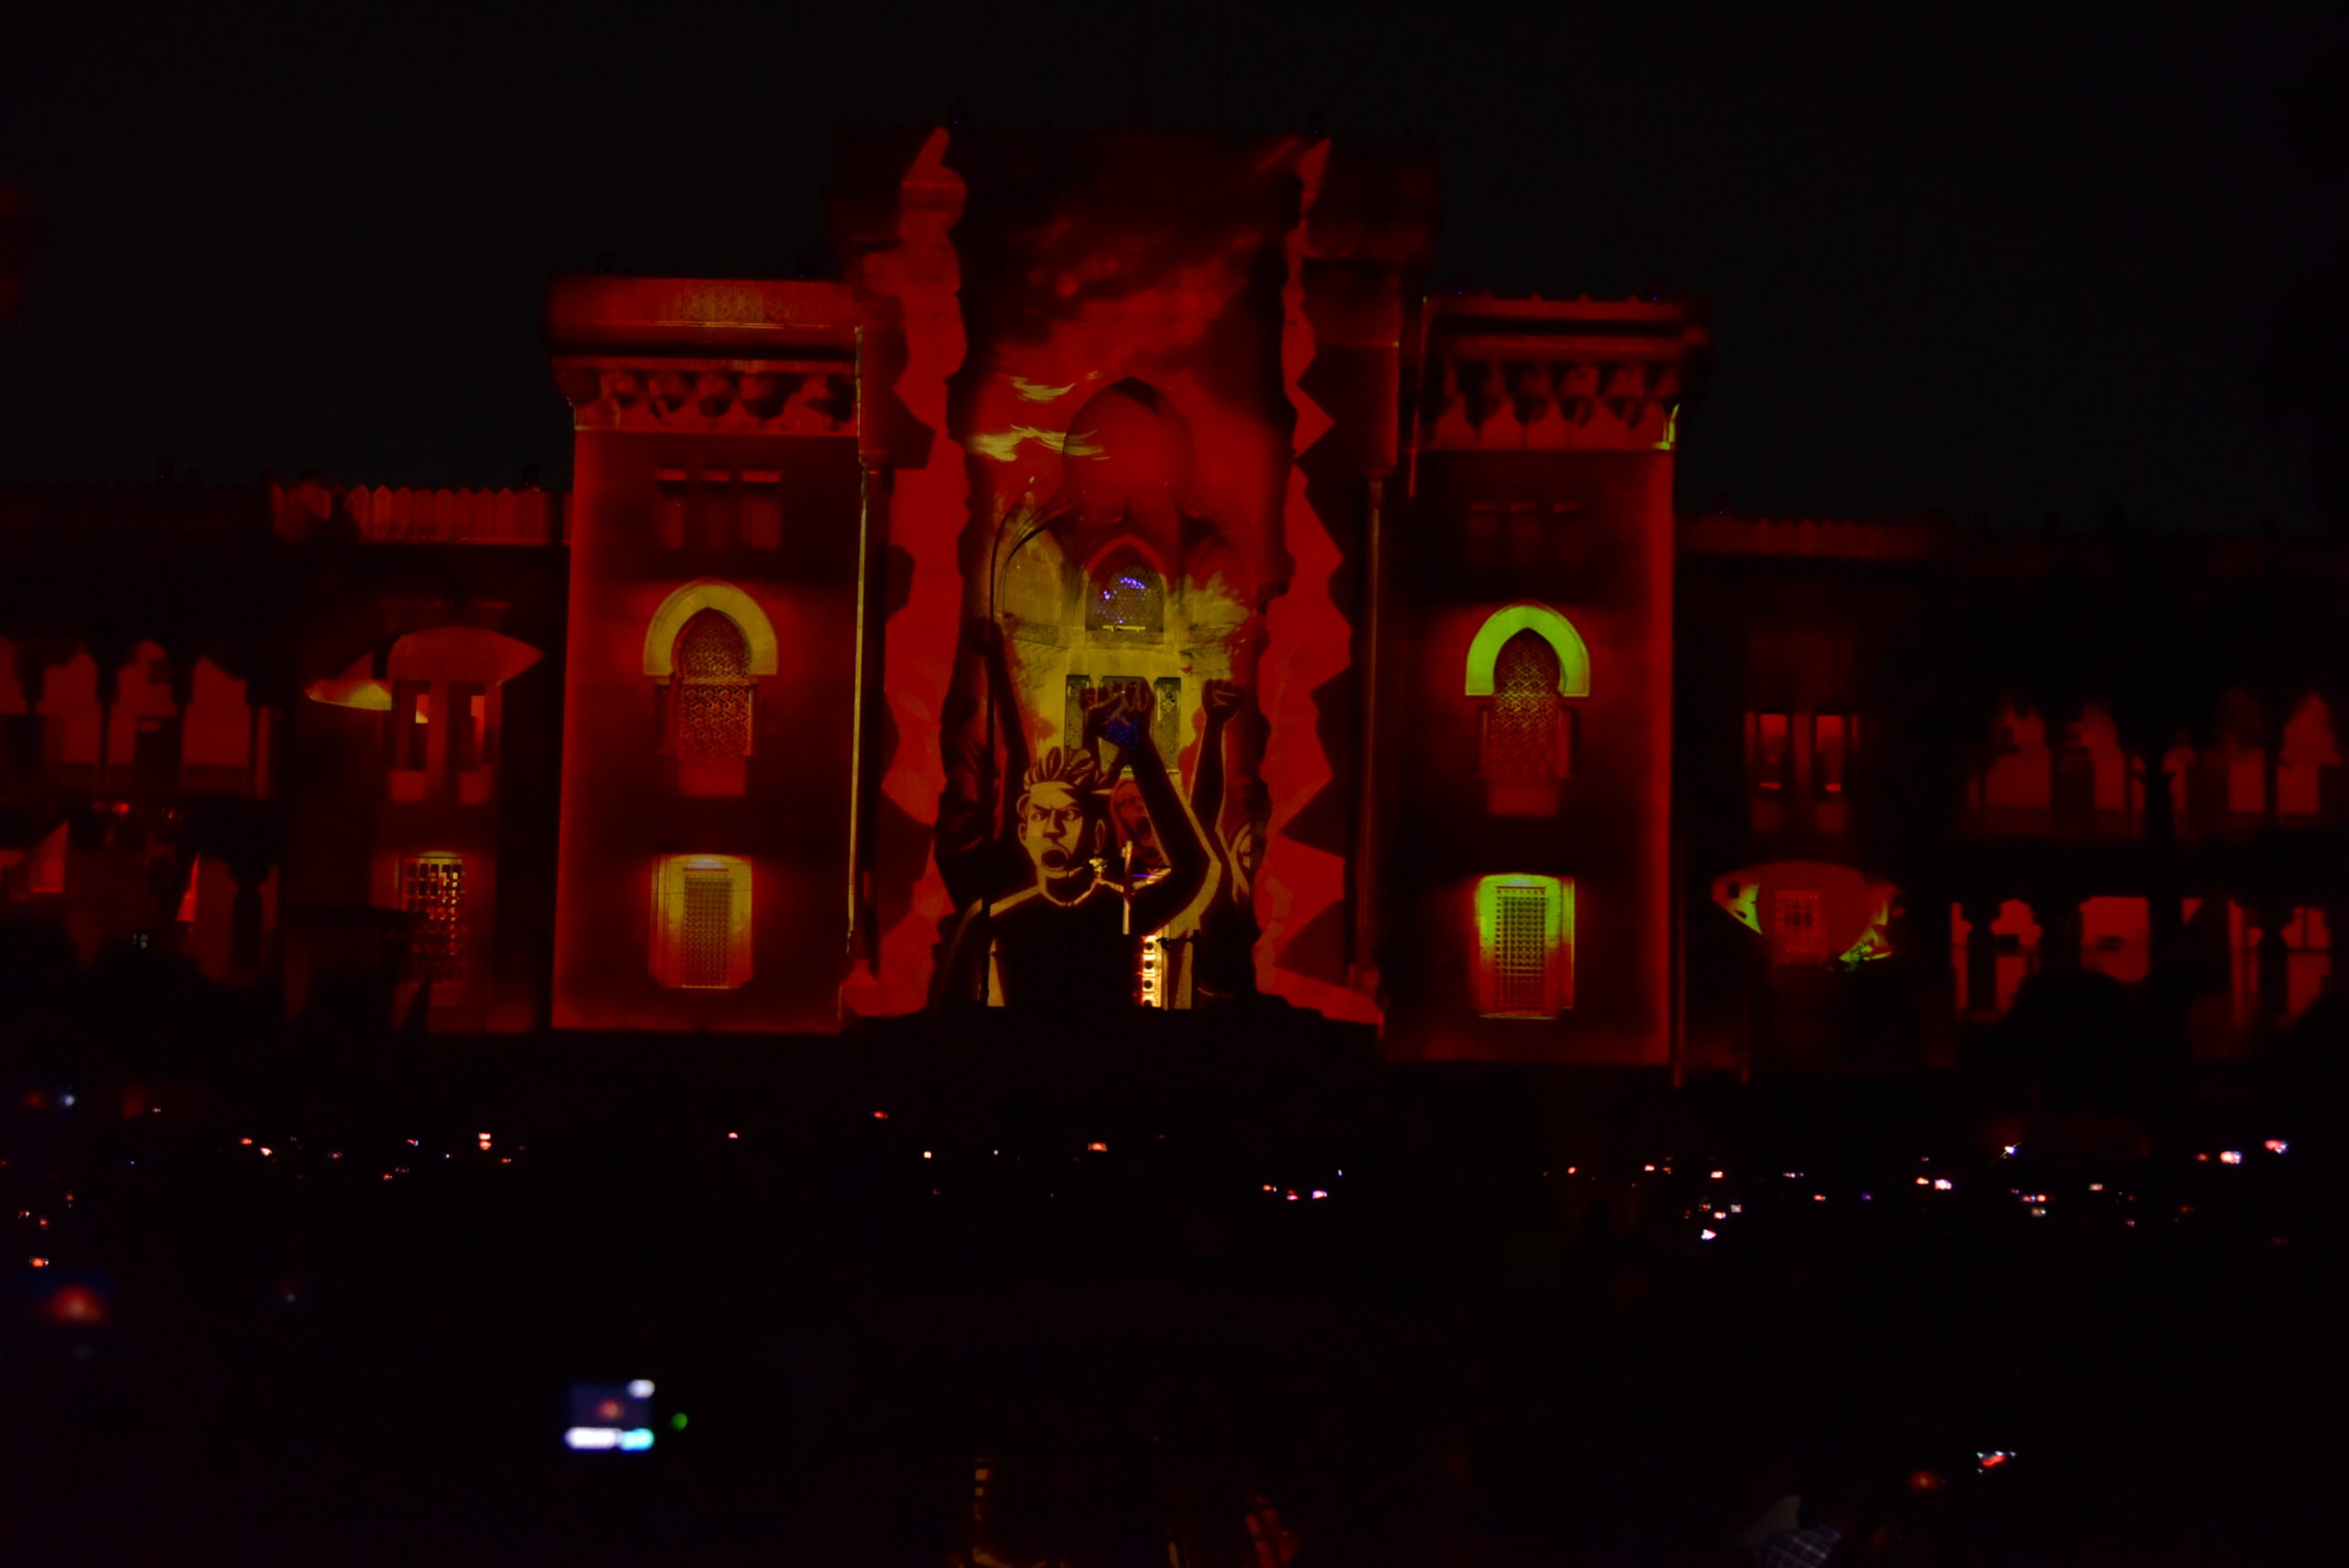 Dynamic Laser Show At Arts College In Osmania University (38)